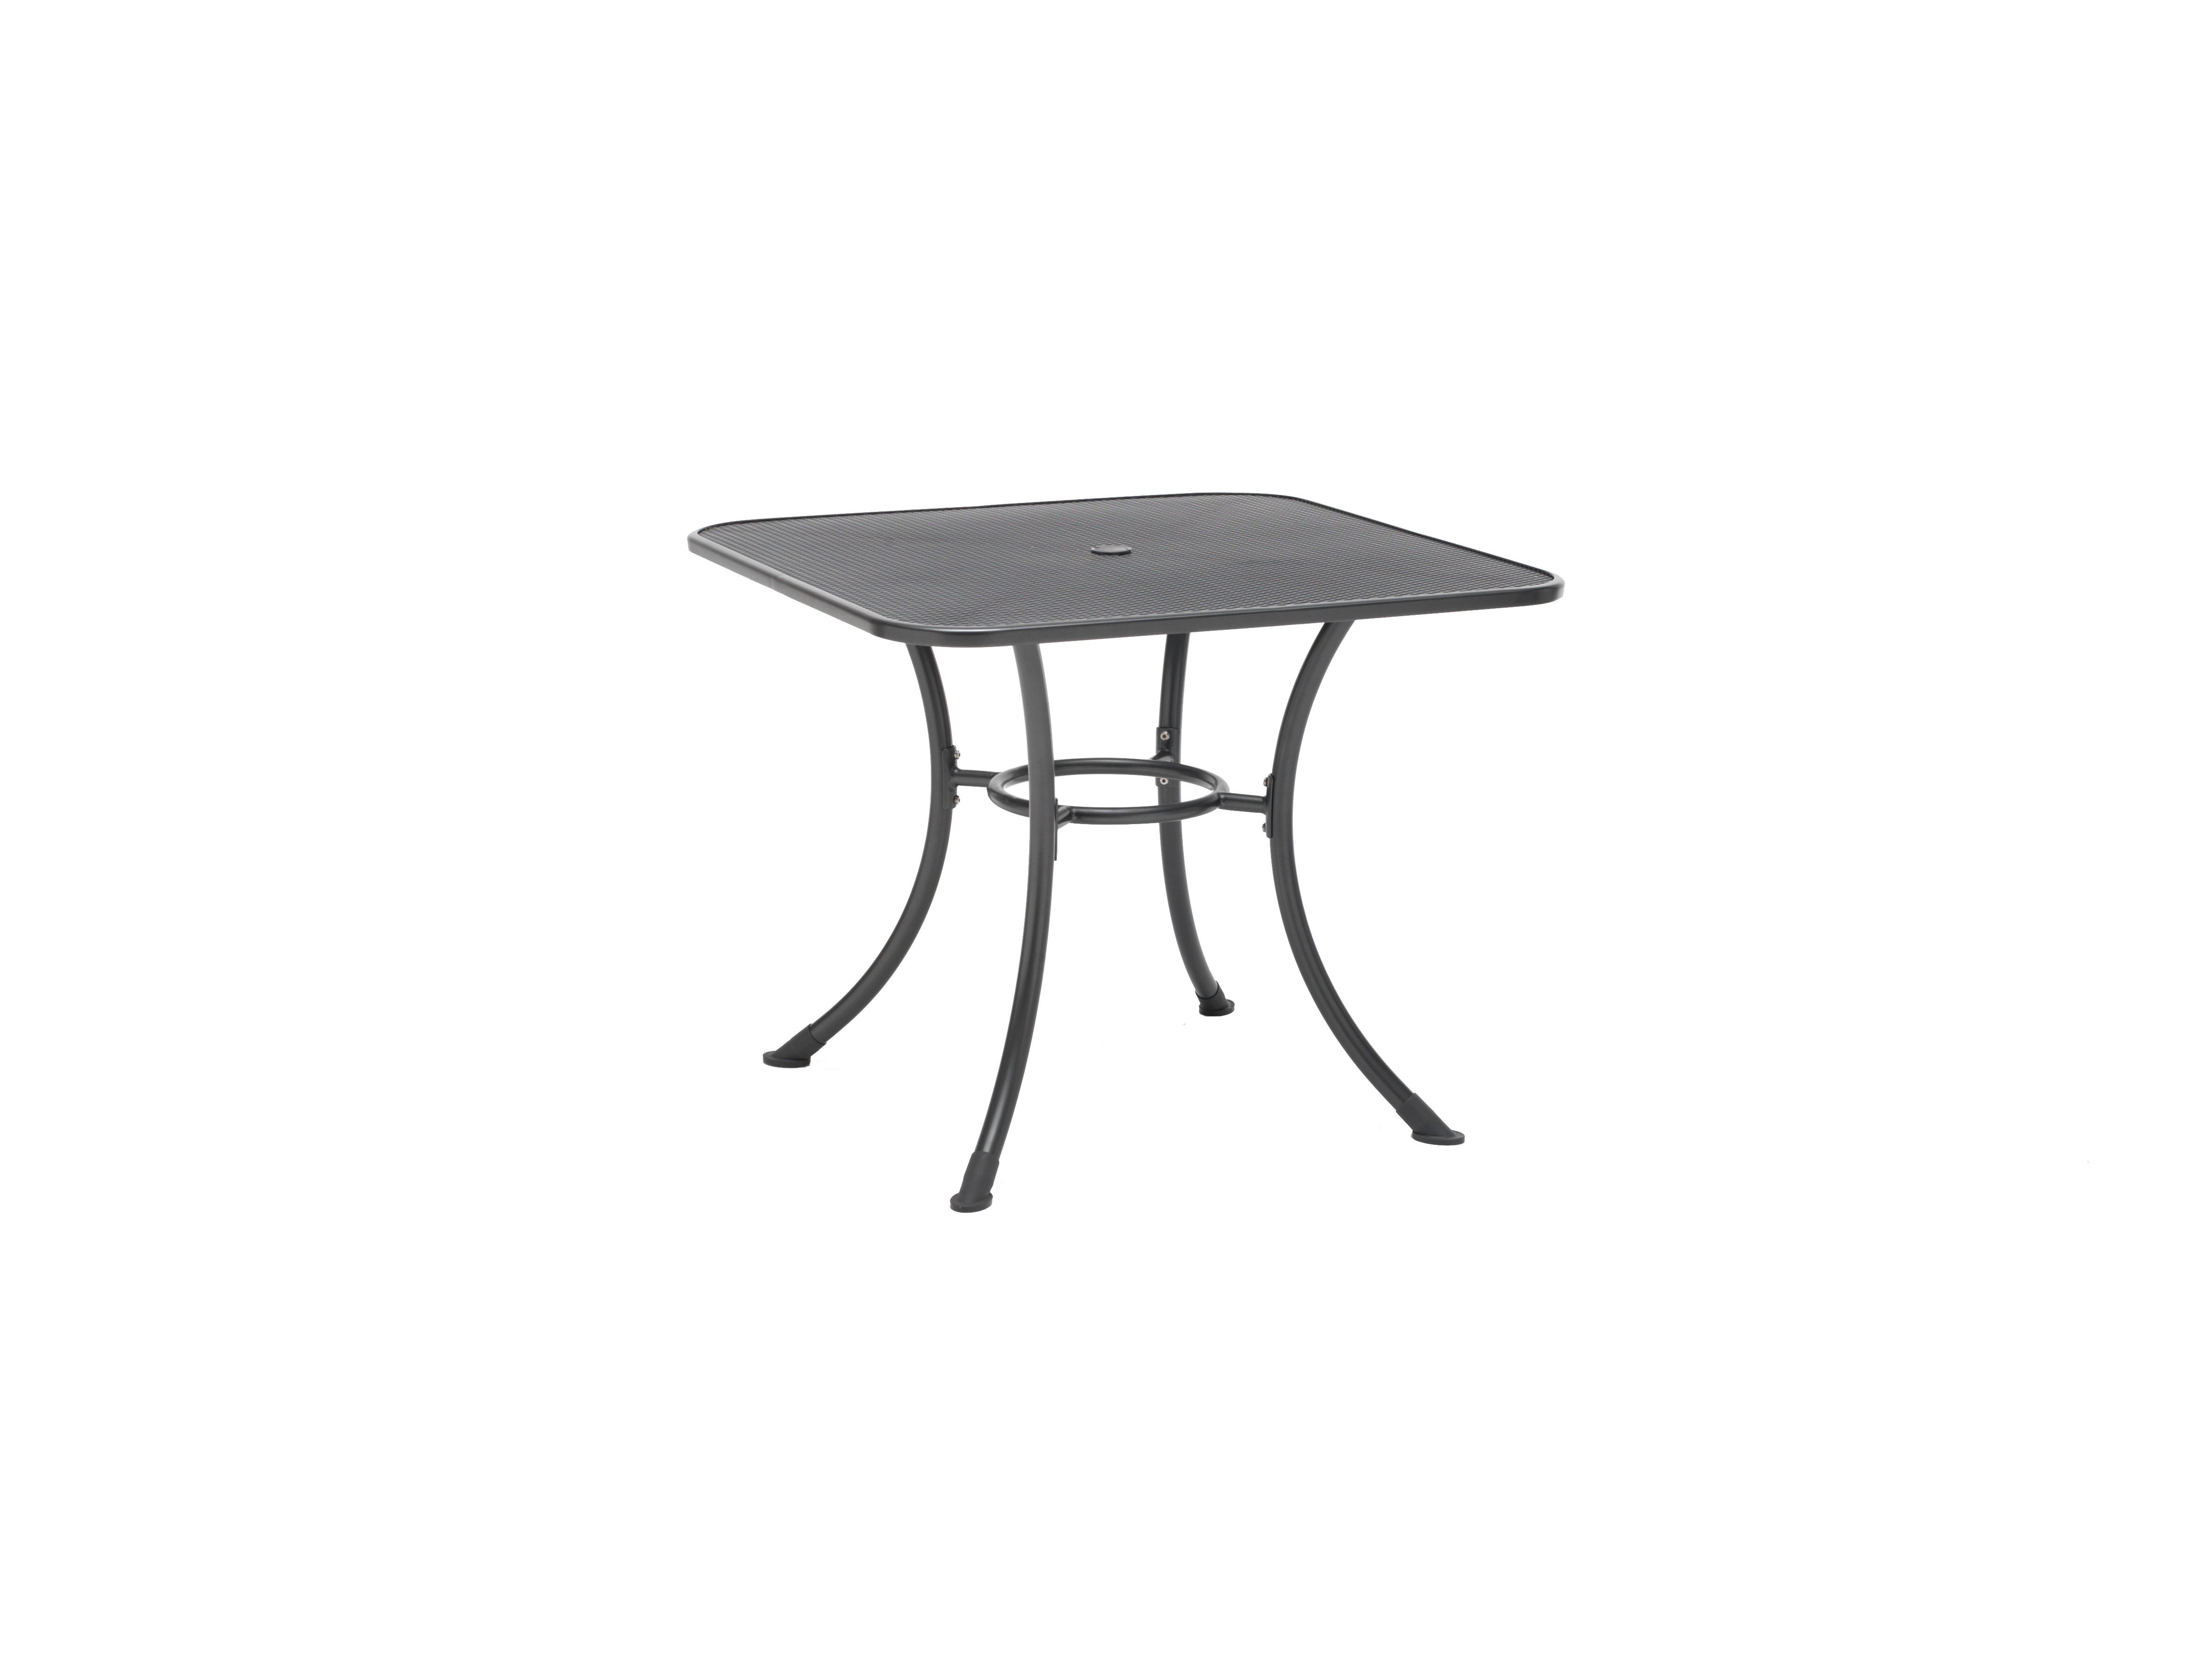 SQUARE TABLES
Sizes: 32″ – 36″
